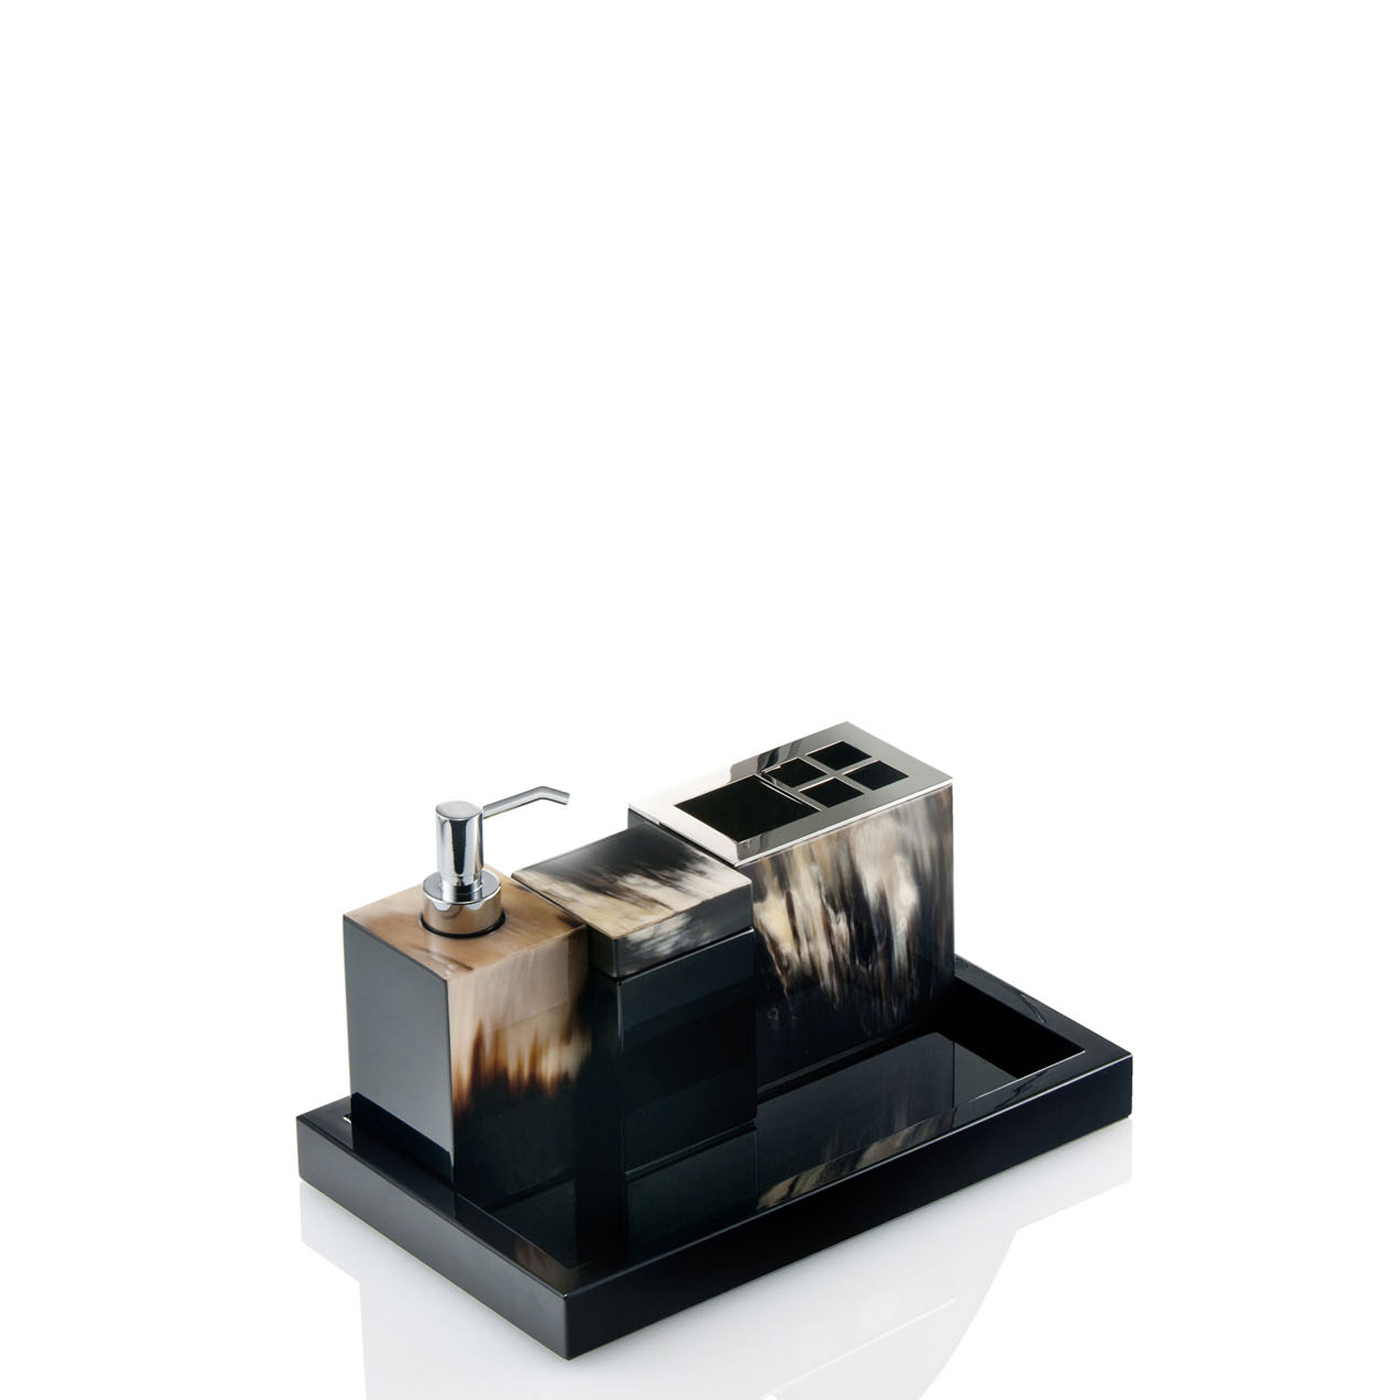 Bath sets - Iris bath set in horn and glossy black lacquered wood - Arcahorn